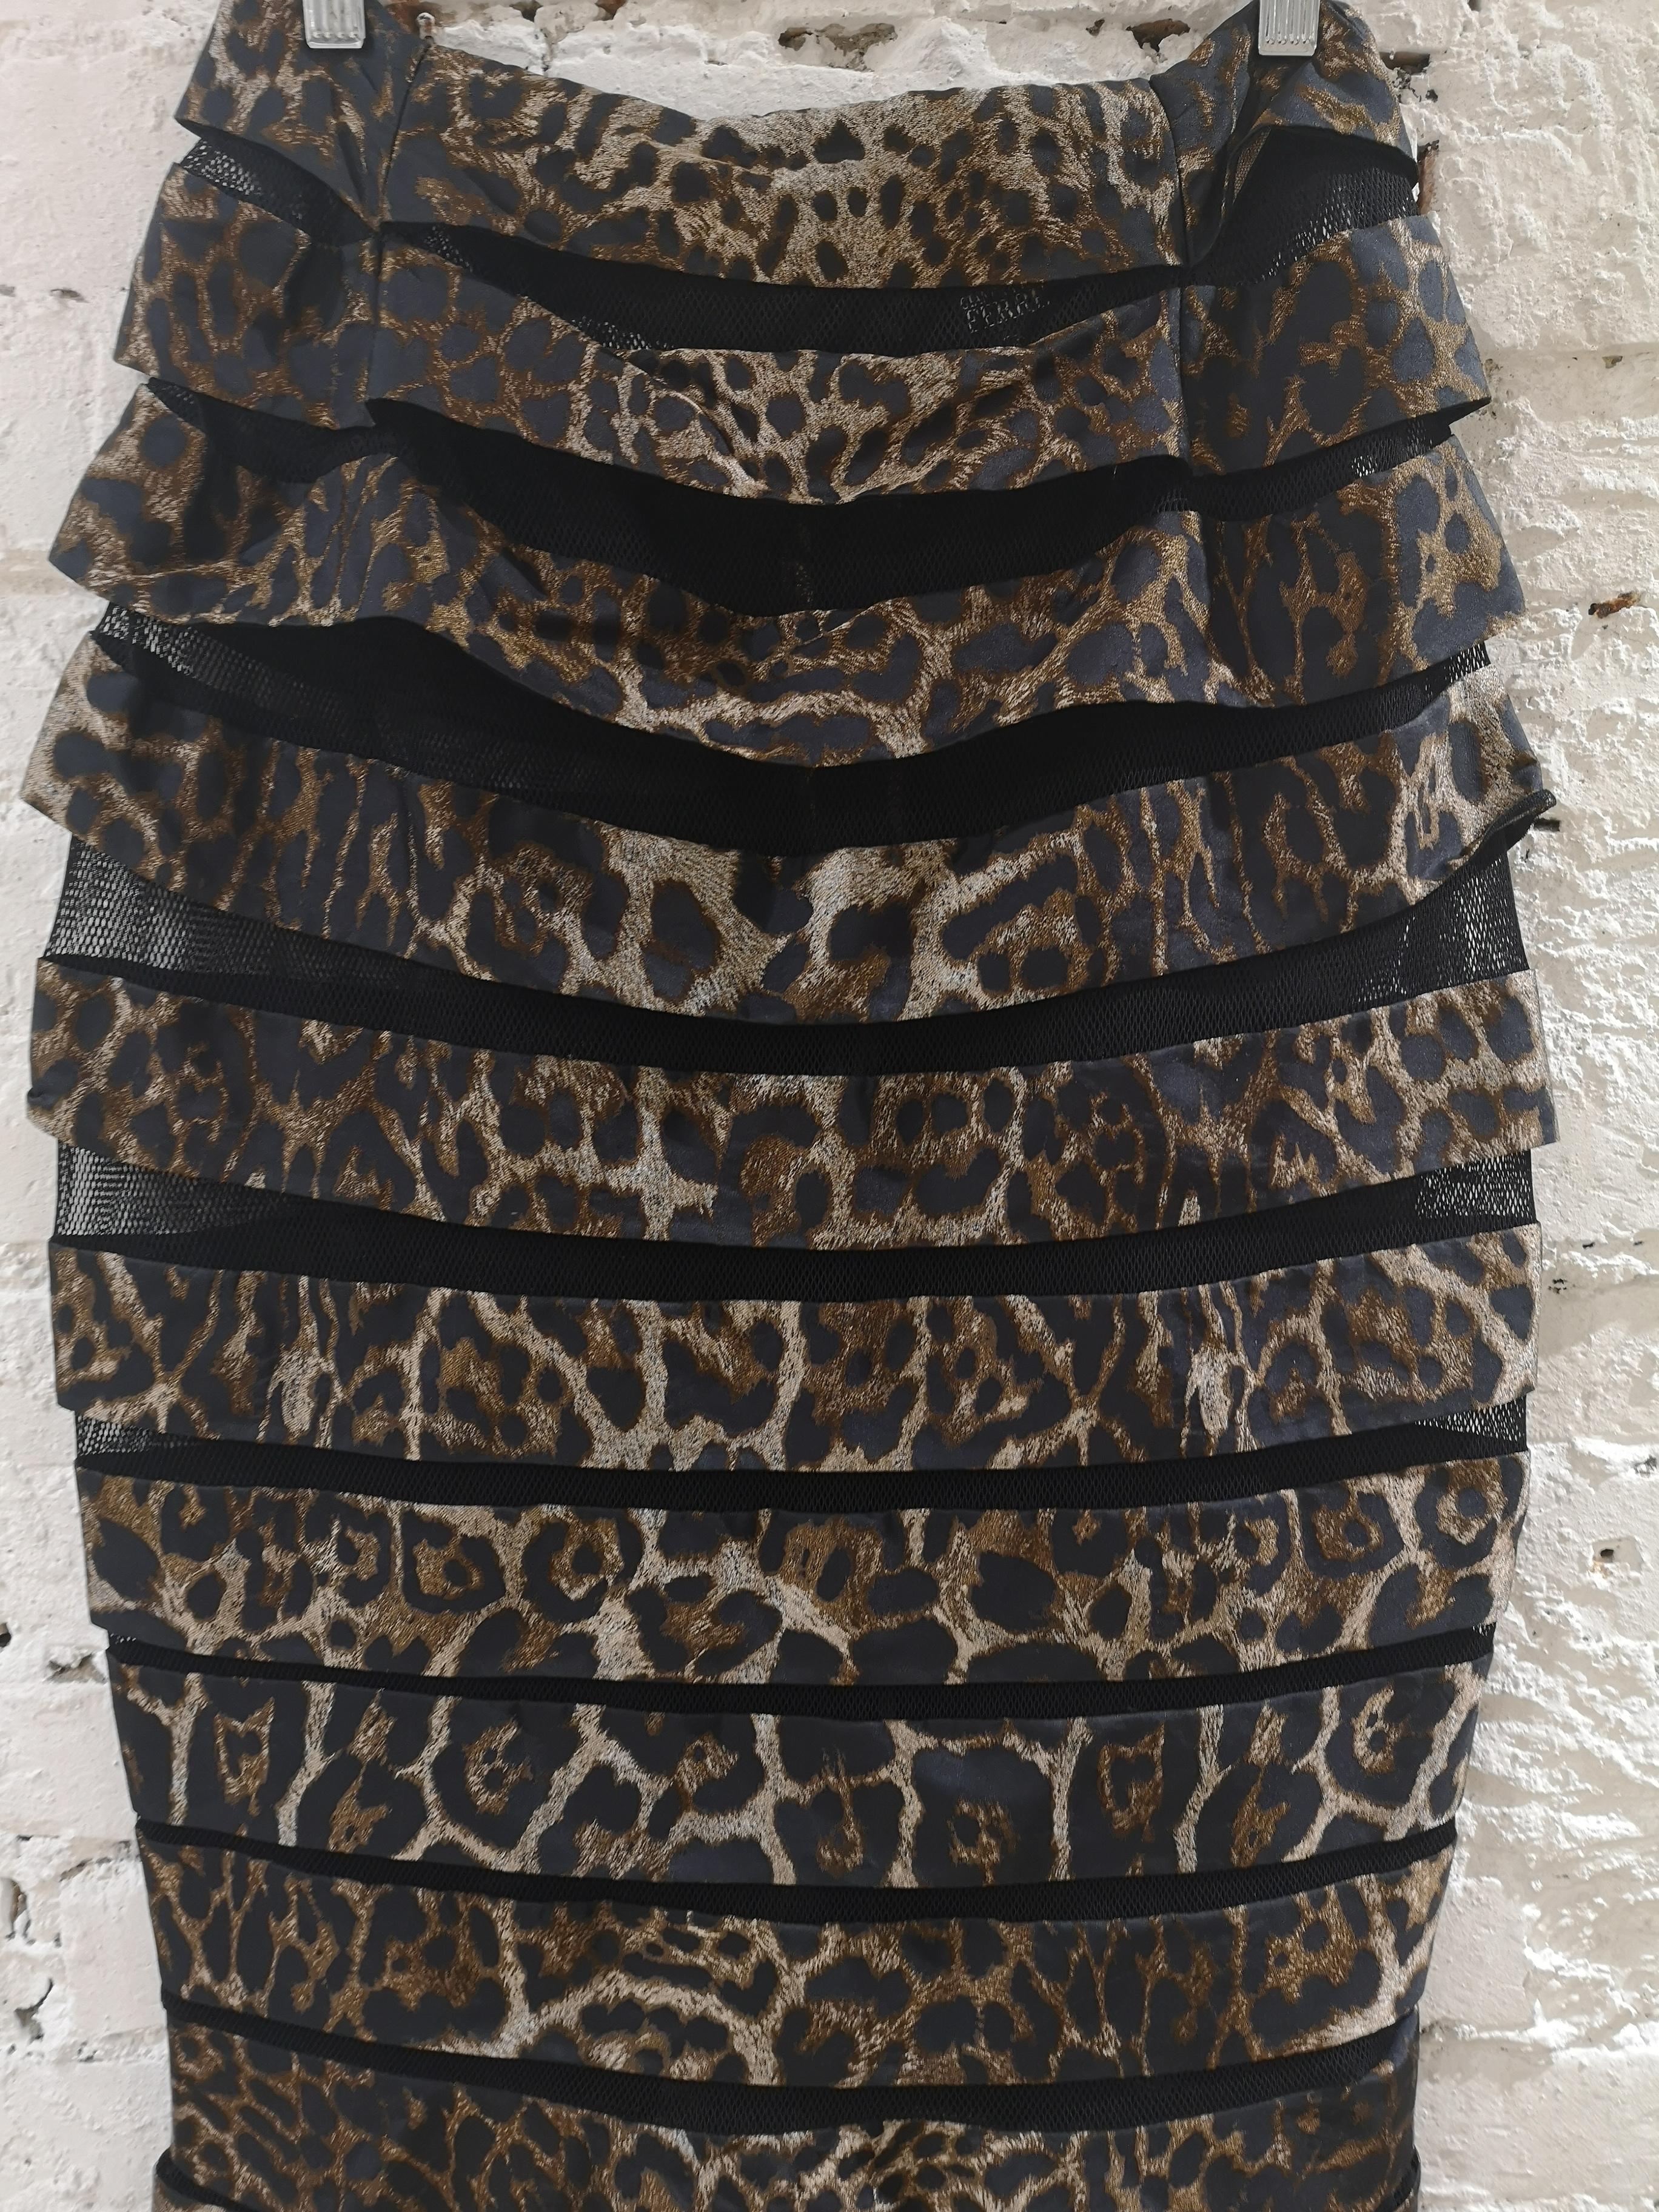 Gianfranco Ferrè cheetah see through skirt In Excellent Condition In Capri, IT